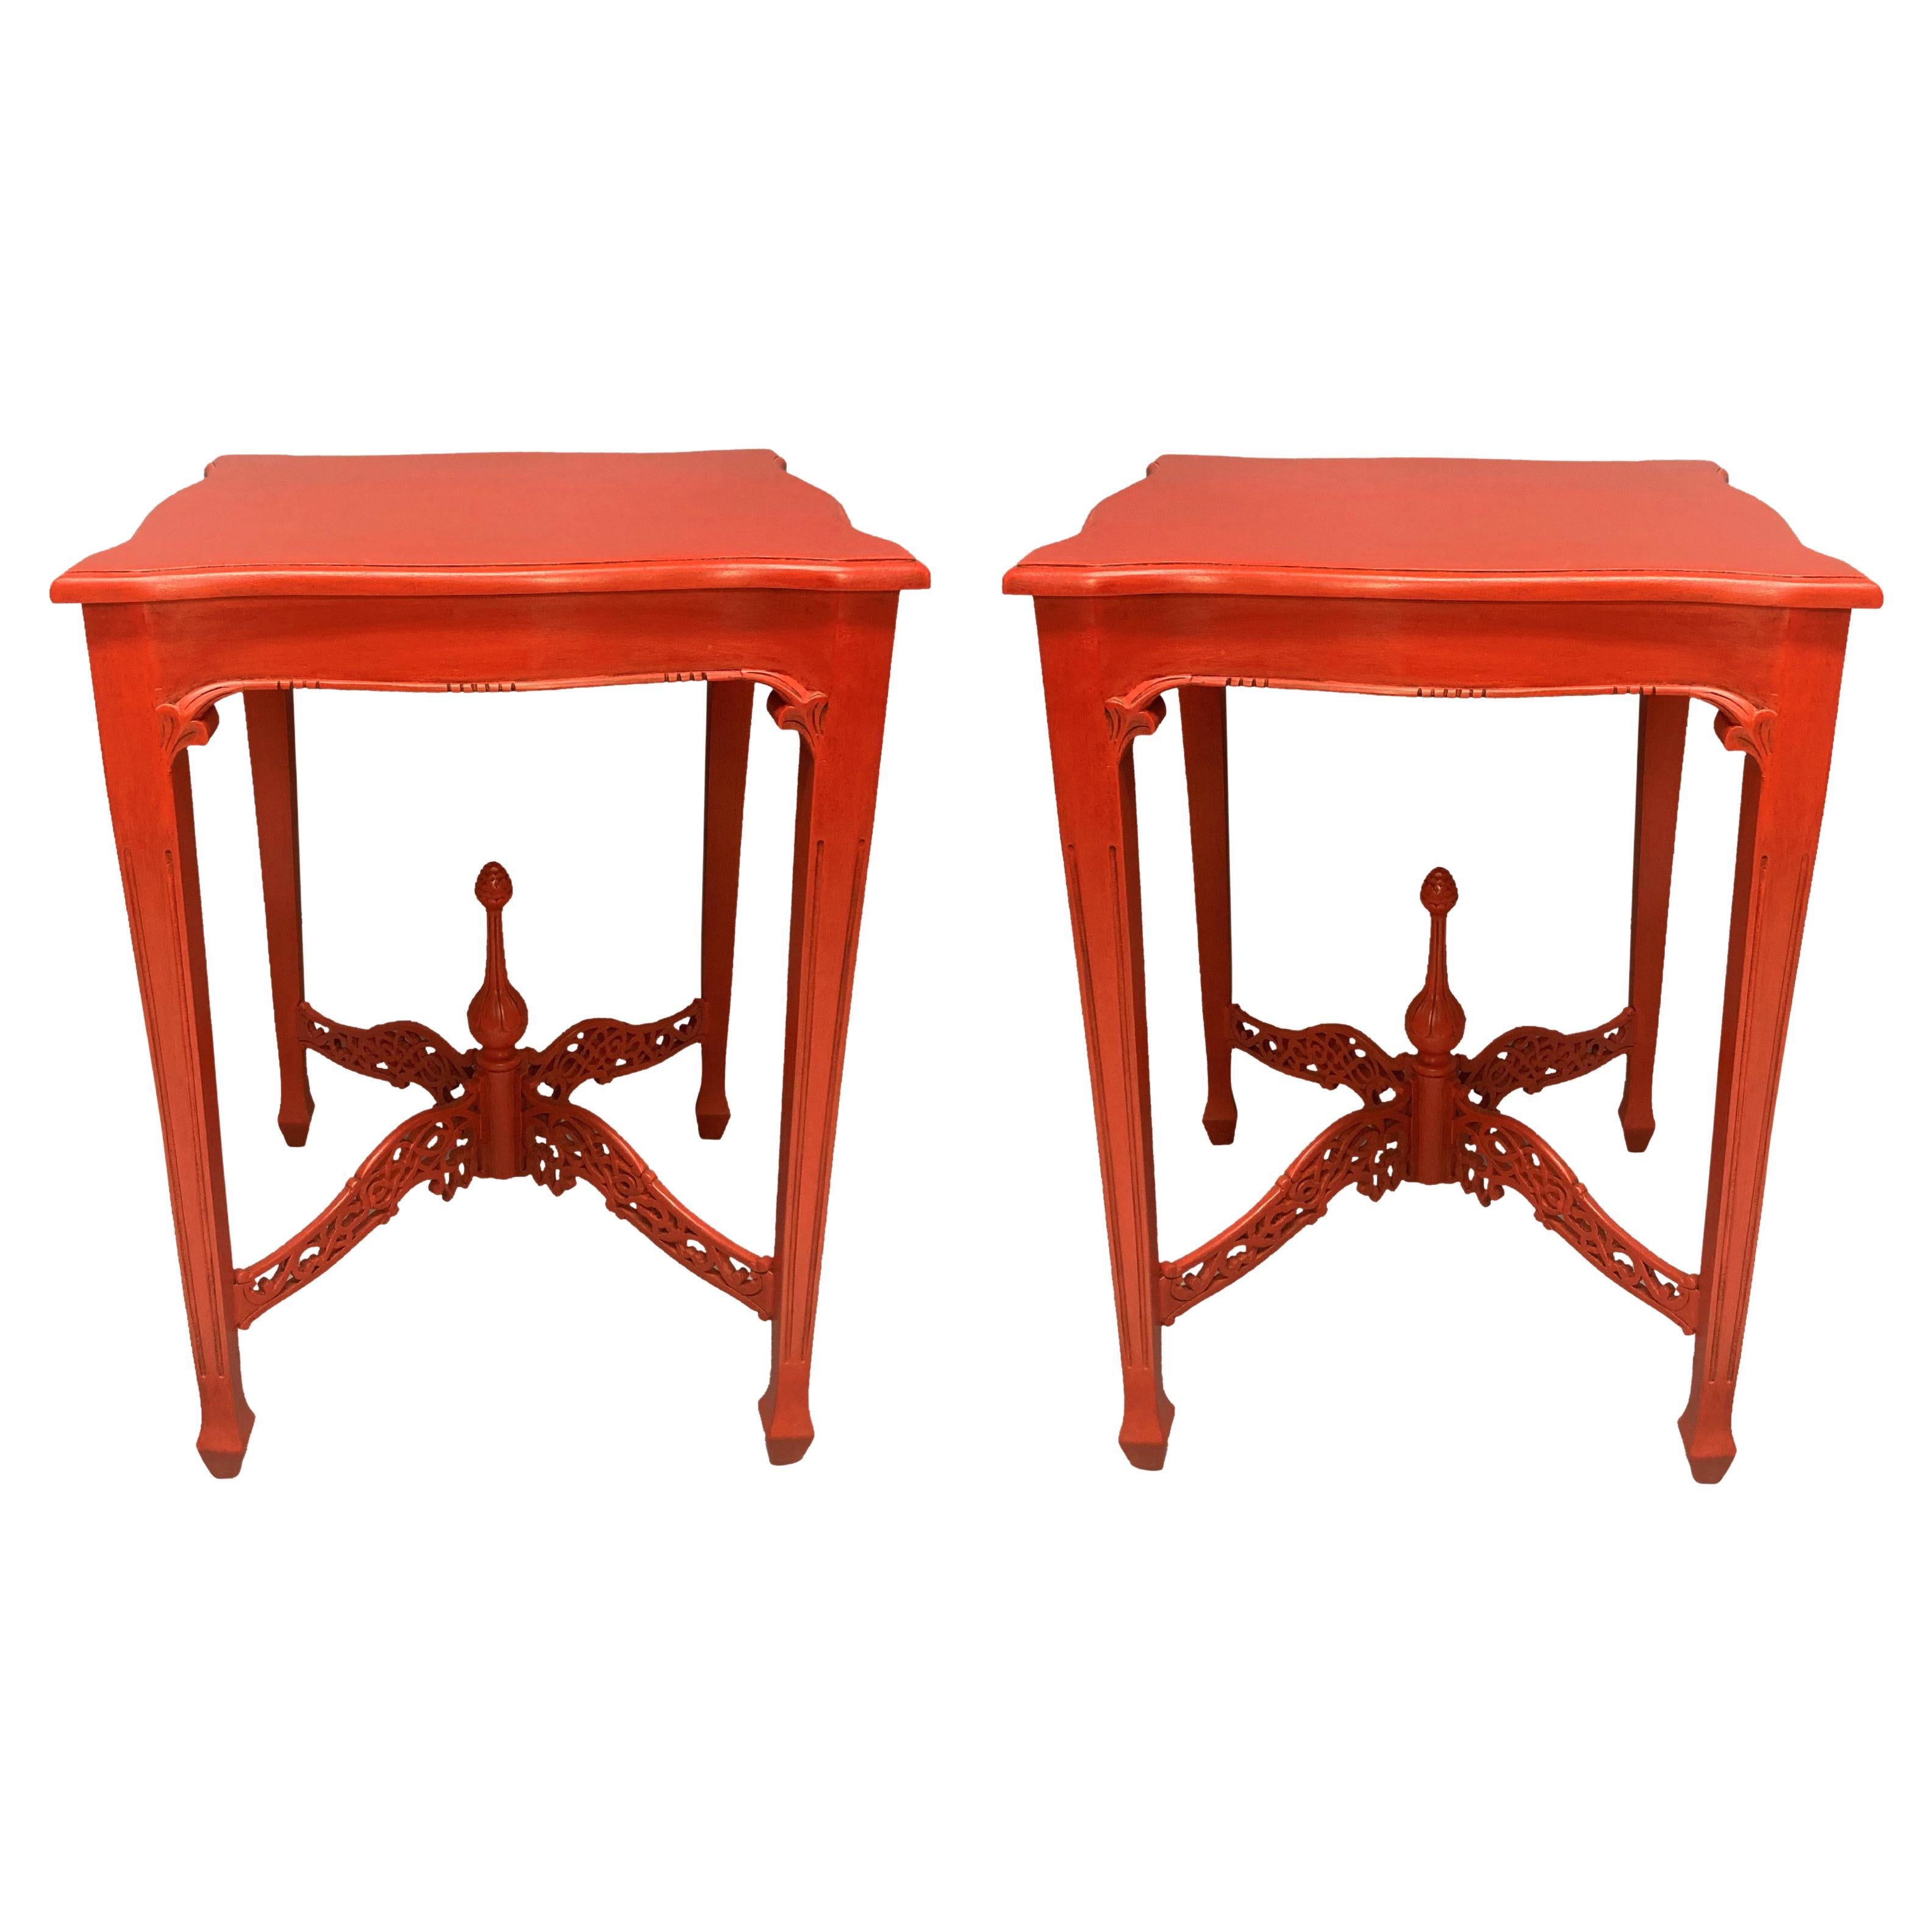 Pair Of Scarlet Chippendale Style Side Tables For Sale